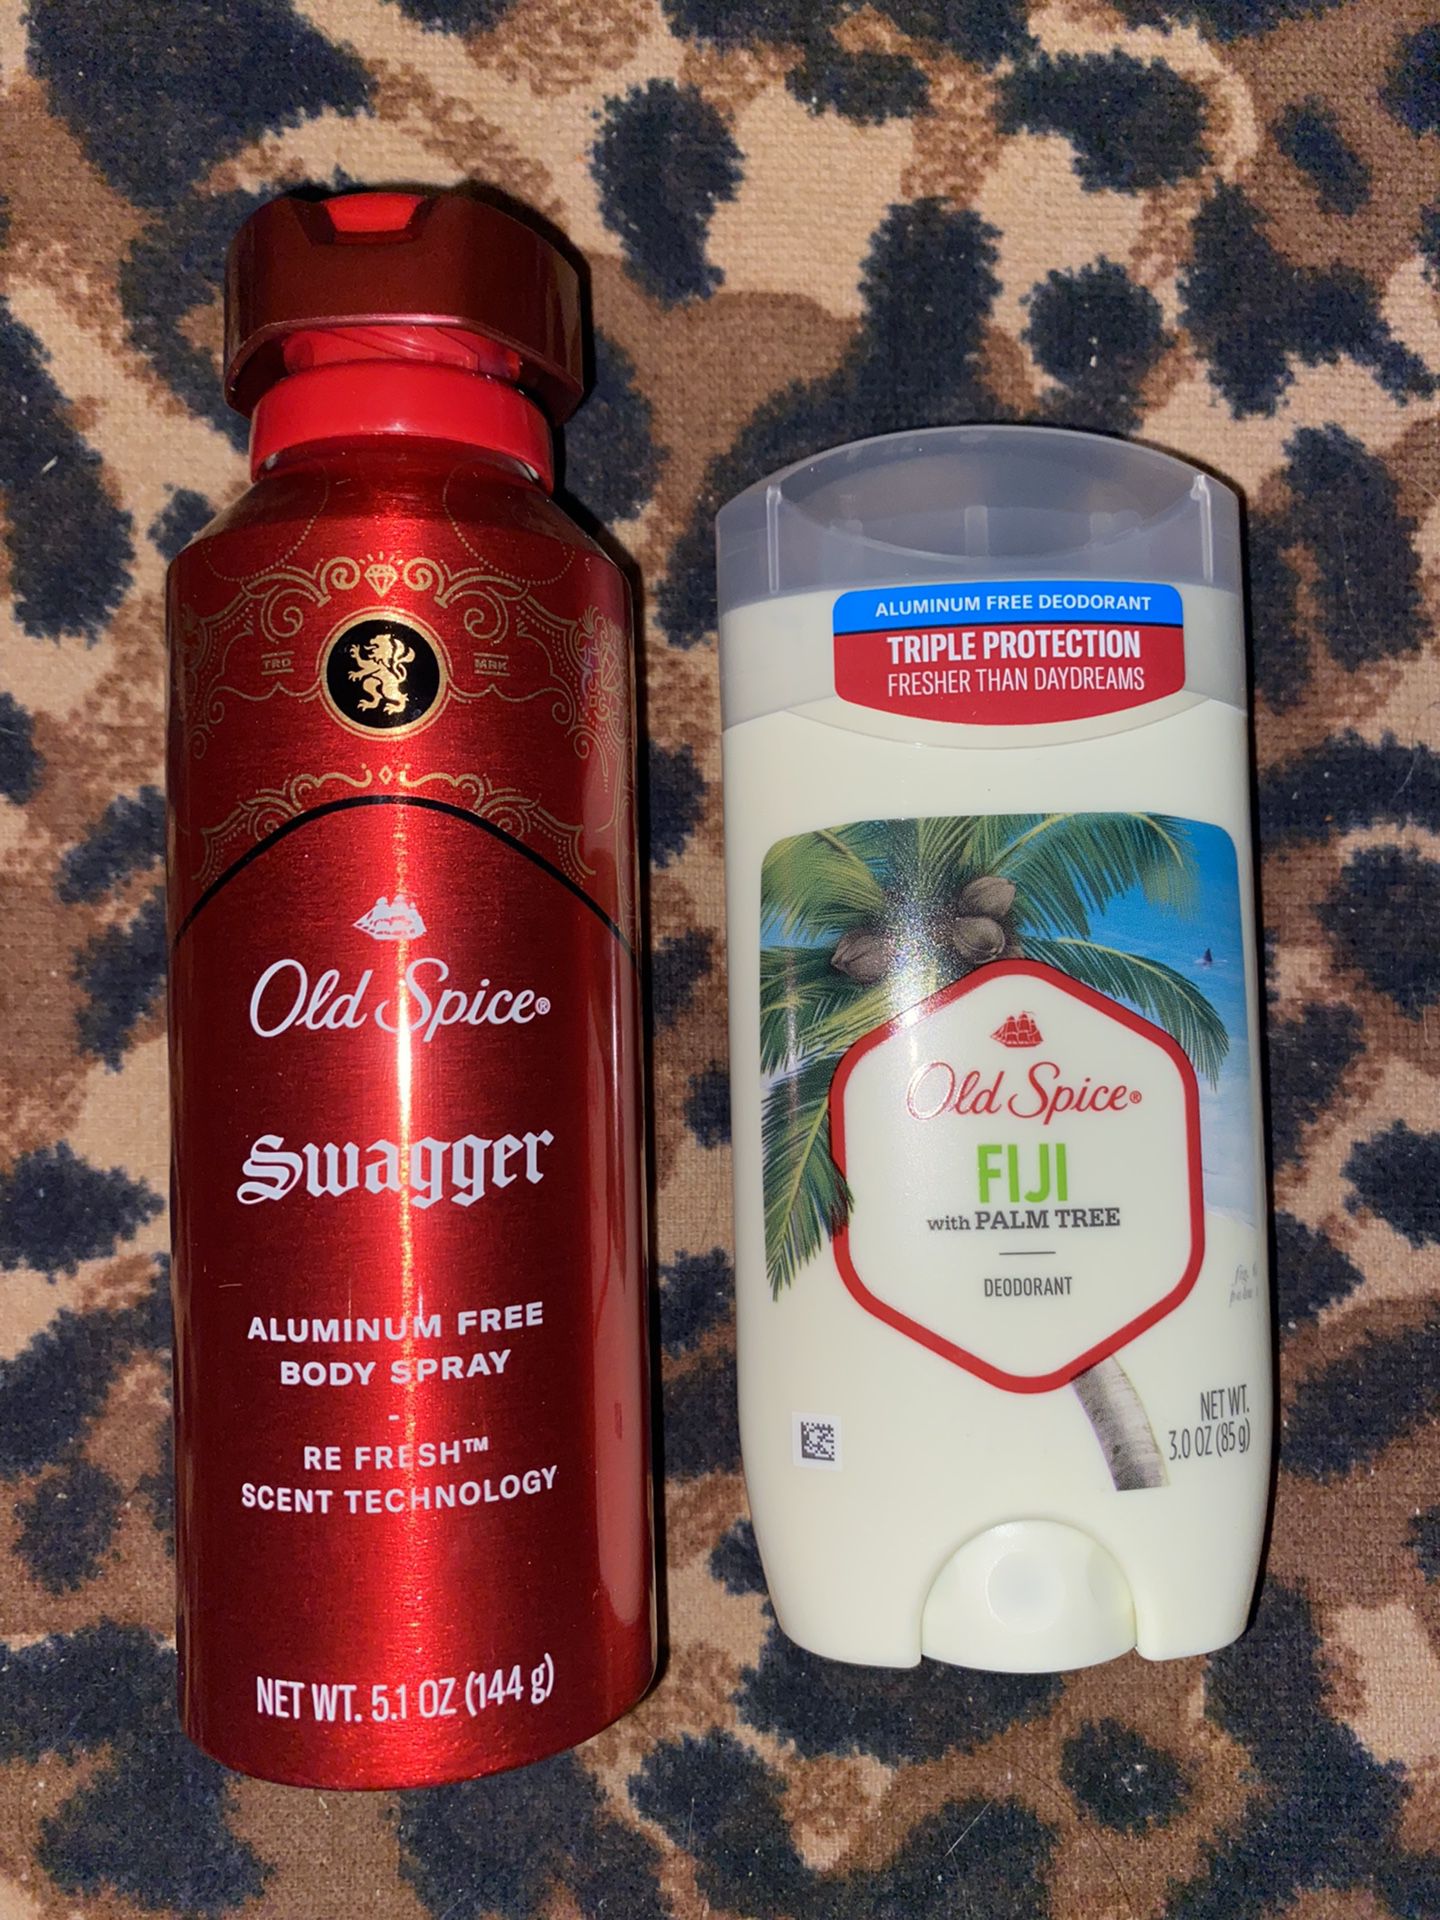 2 🔥Old Spice Deodorant Both For $10